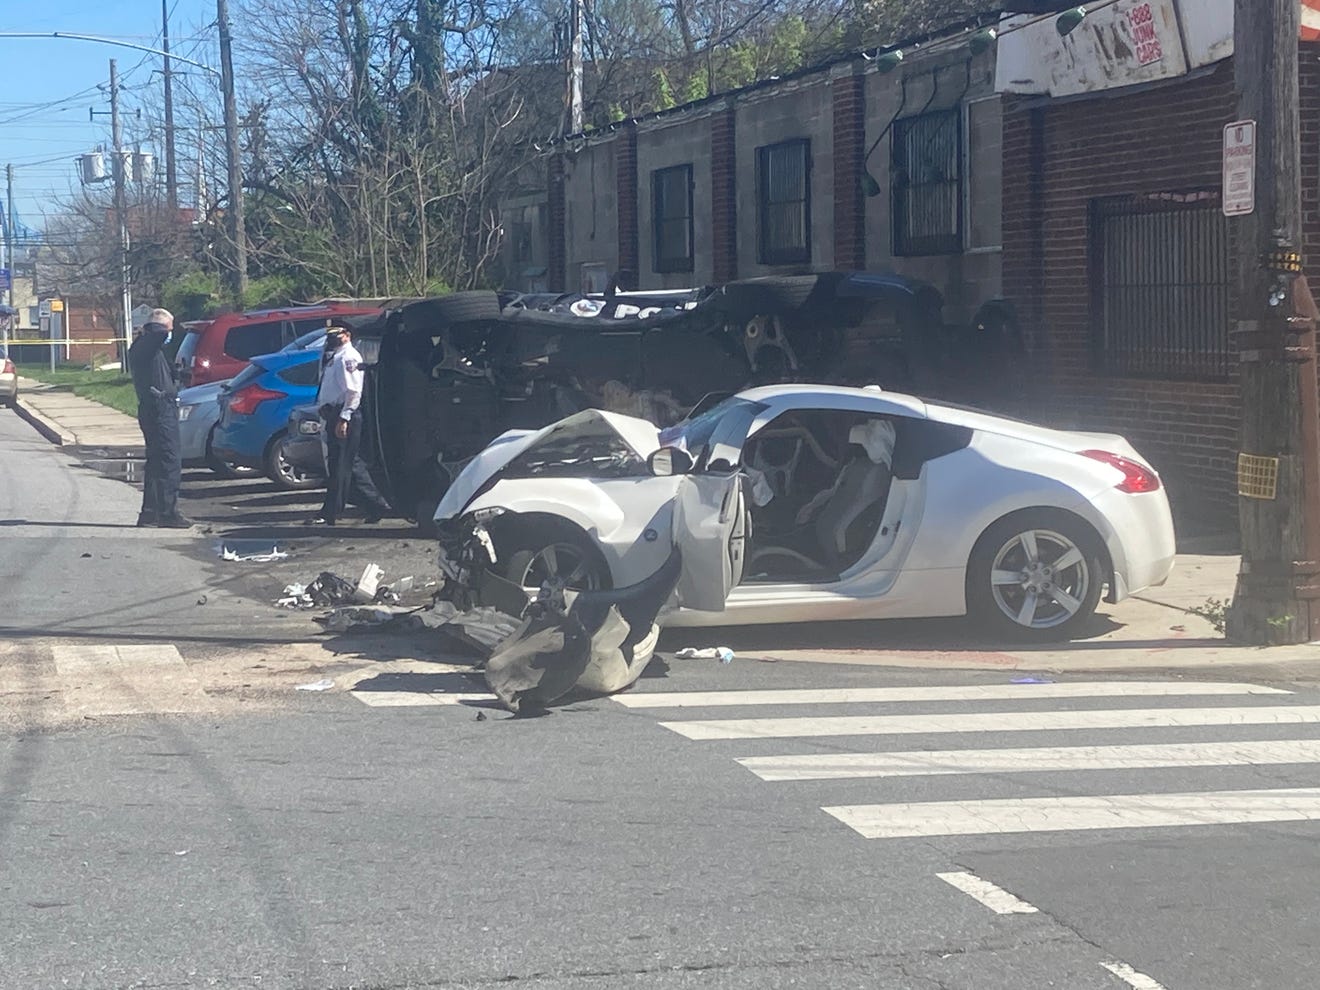 Wilmington police vehicle overturned in Tuesday afternoon crash